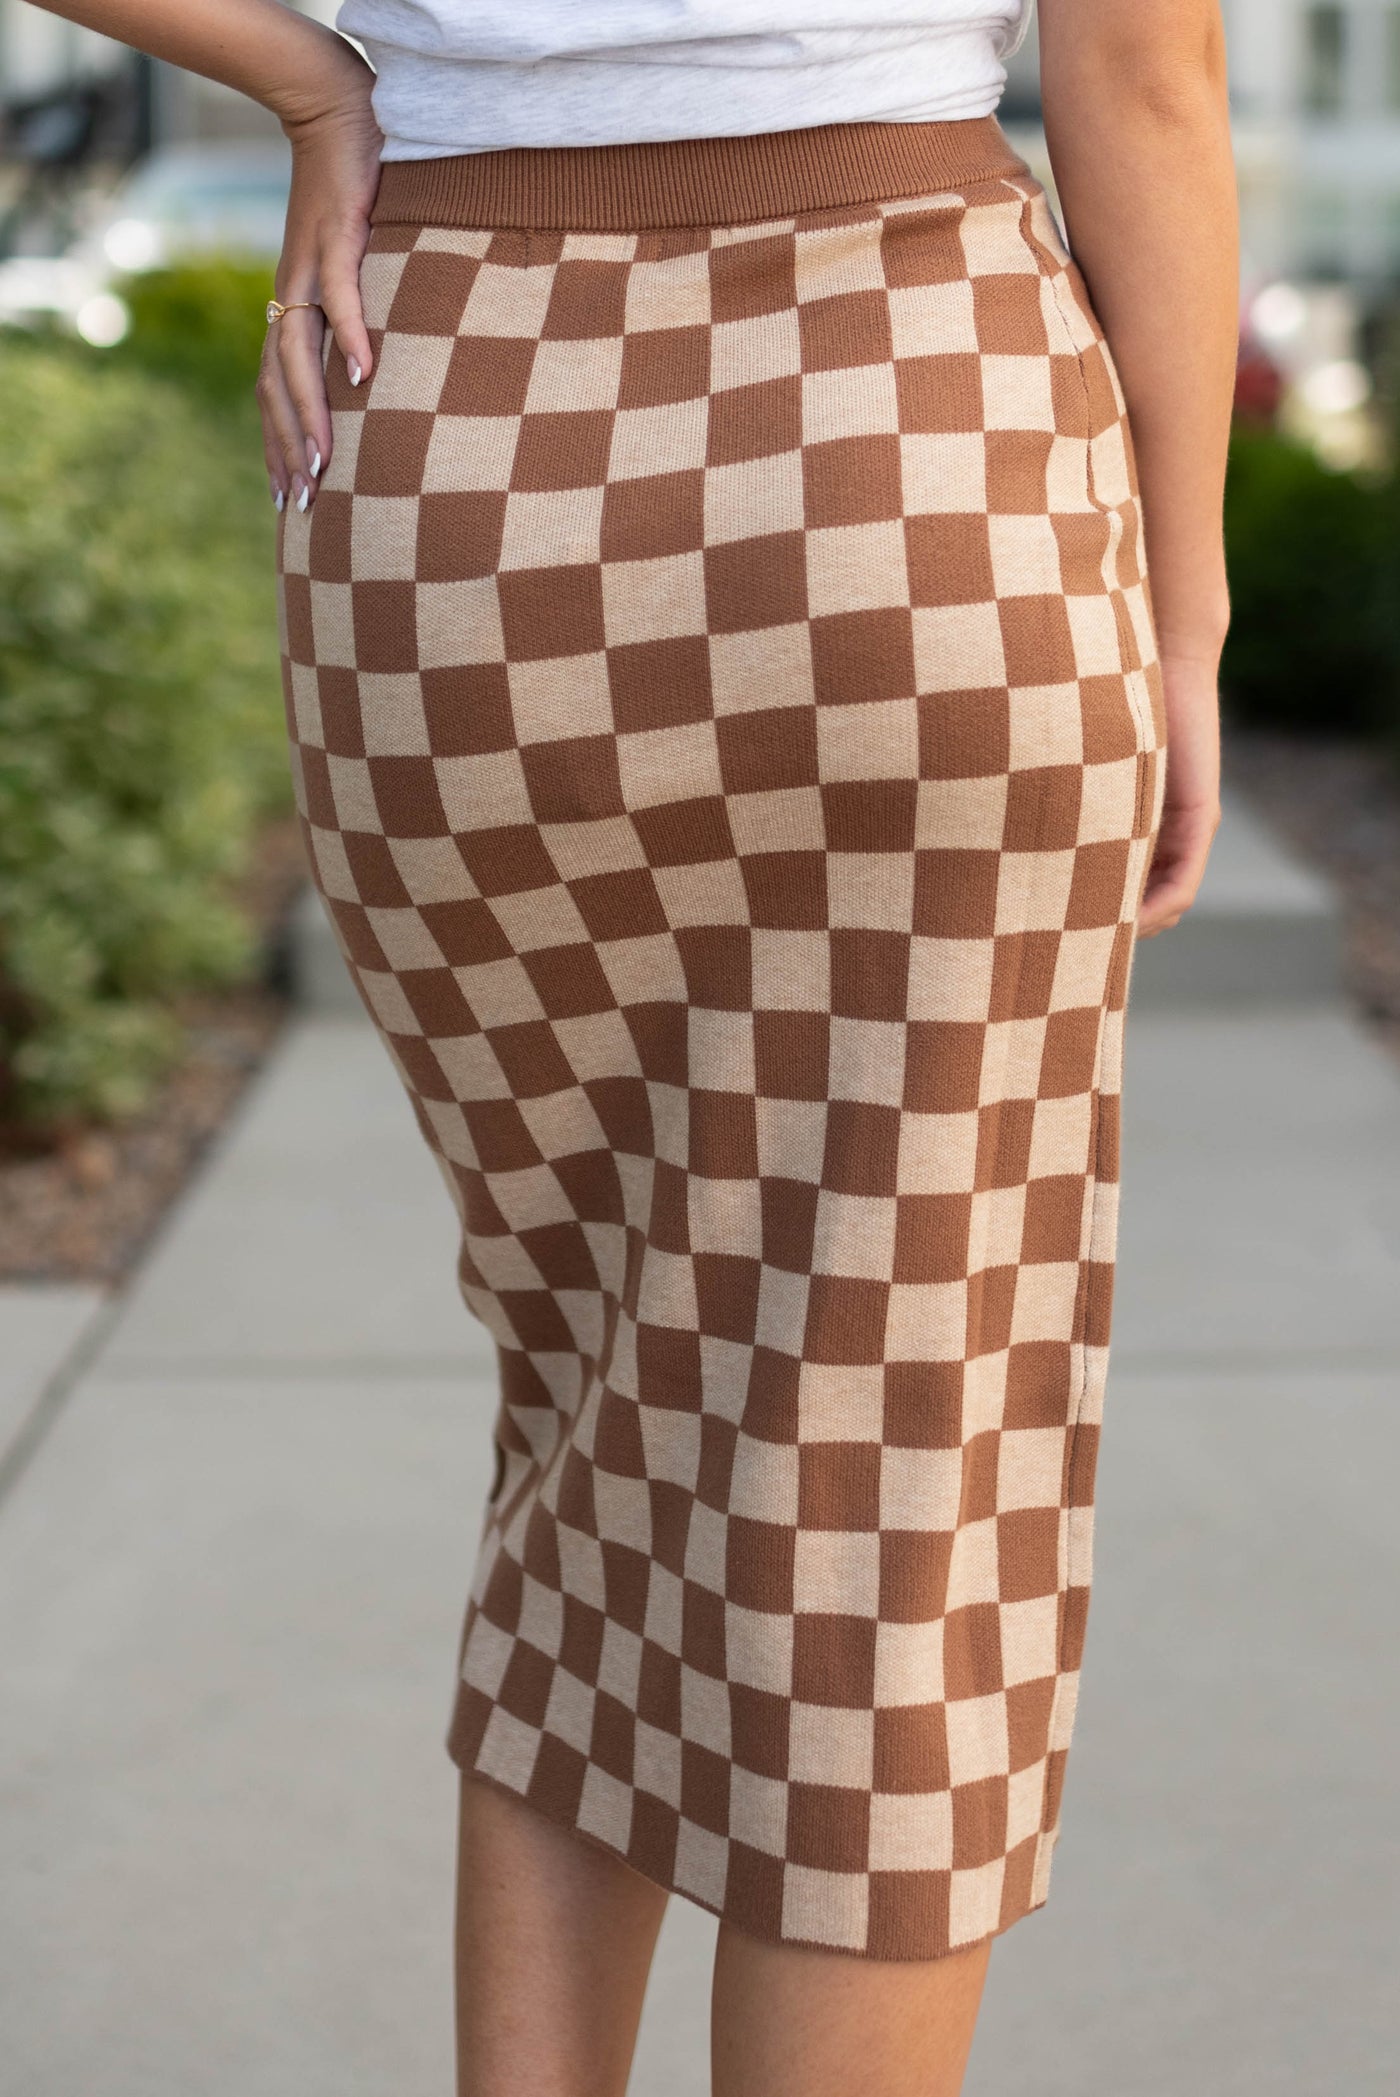 Back view of a brown skirt